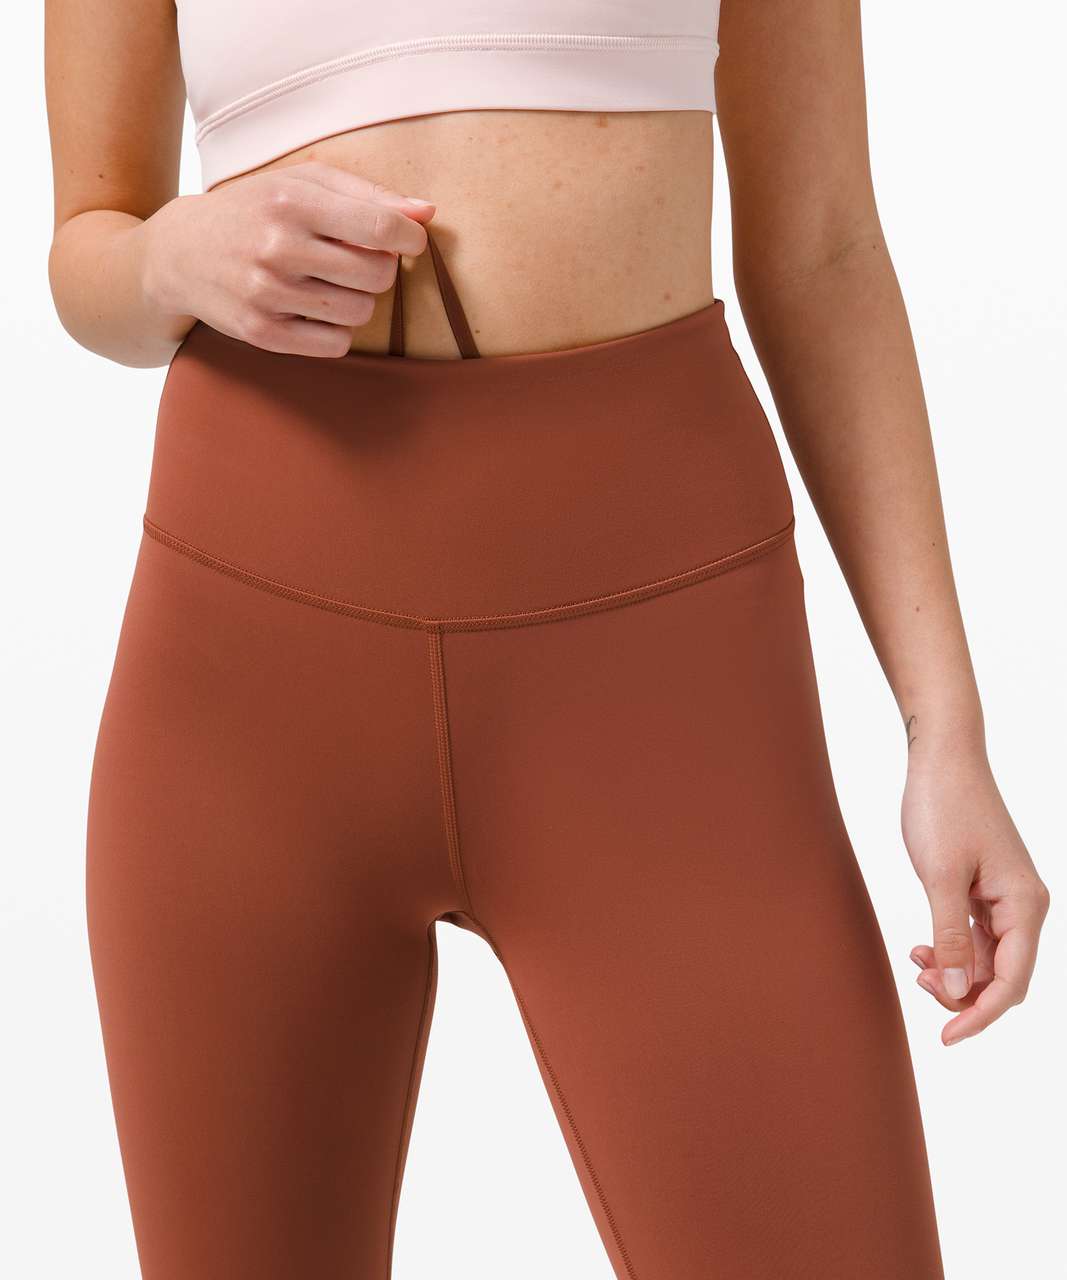 Lululemon Fast and Free High-Rise Tight 25” Pockets *Updated Dark  Terracotta Size 10 - $100 New With Tags - From Stephanie